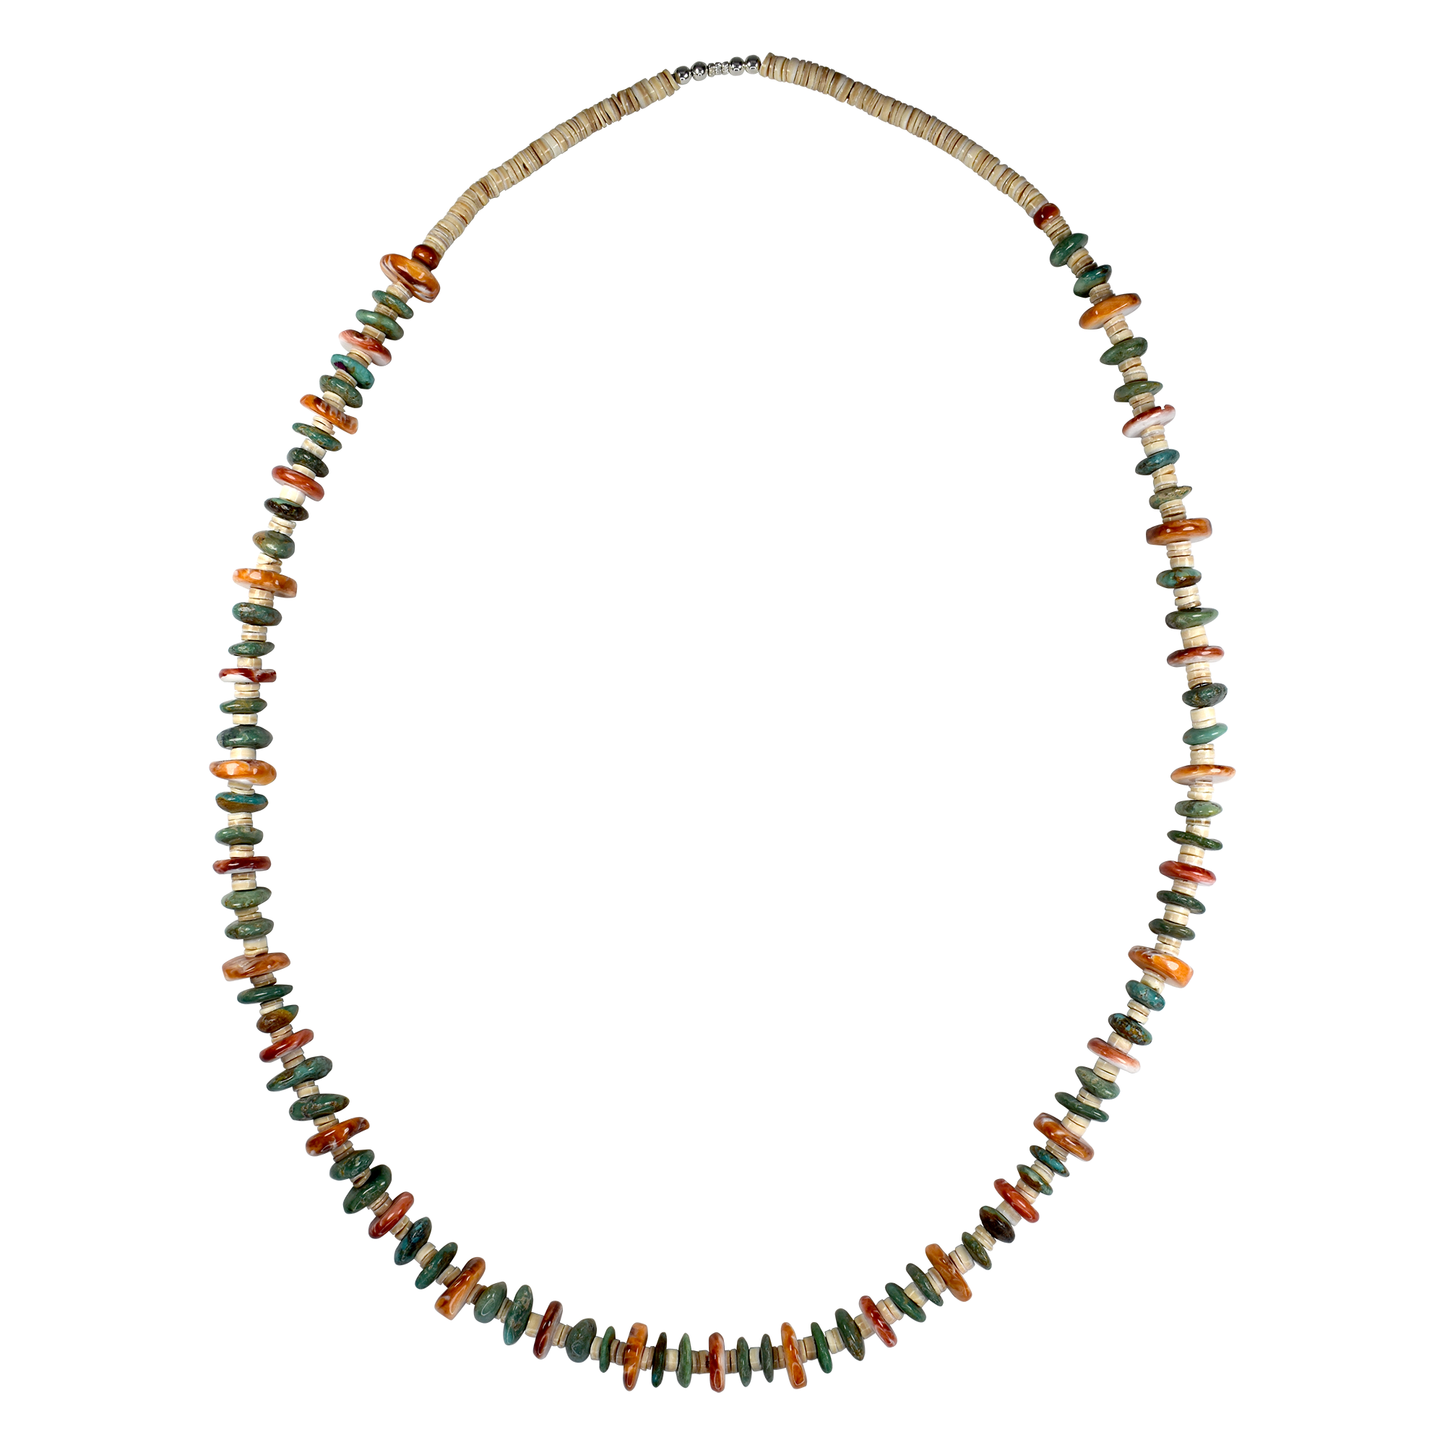 Spiny Oyster and Turquoise Necklace with Heishi Beads by Teller Indian Jewelry